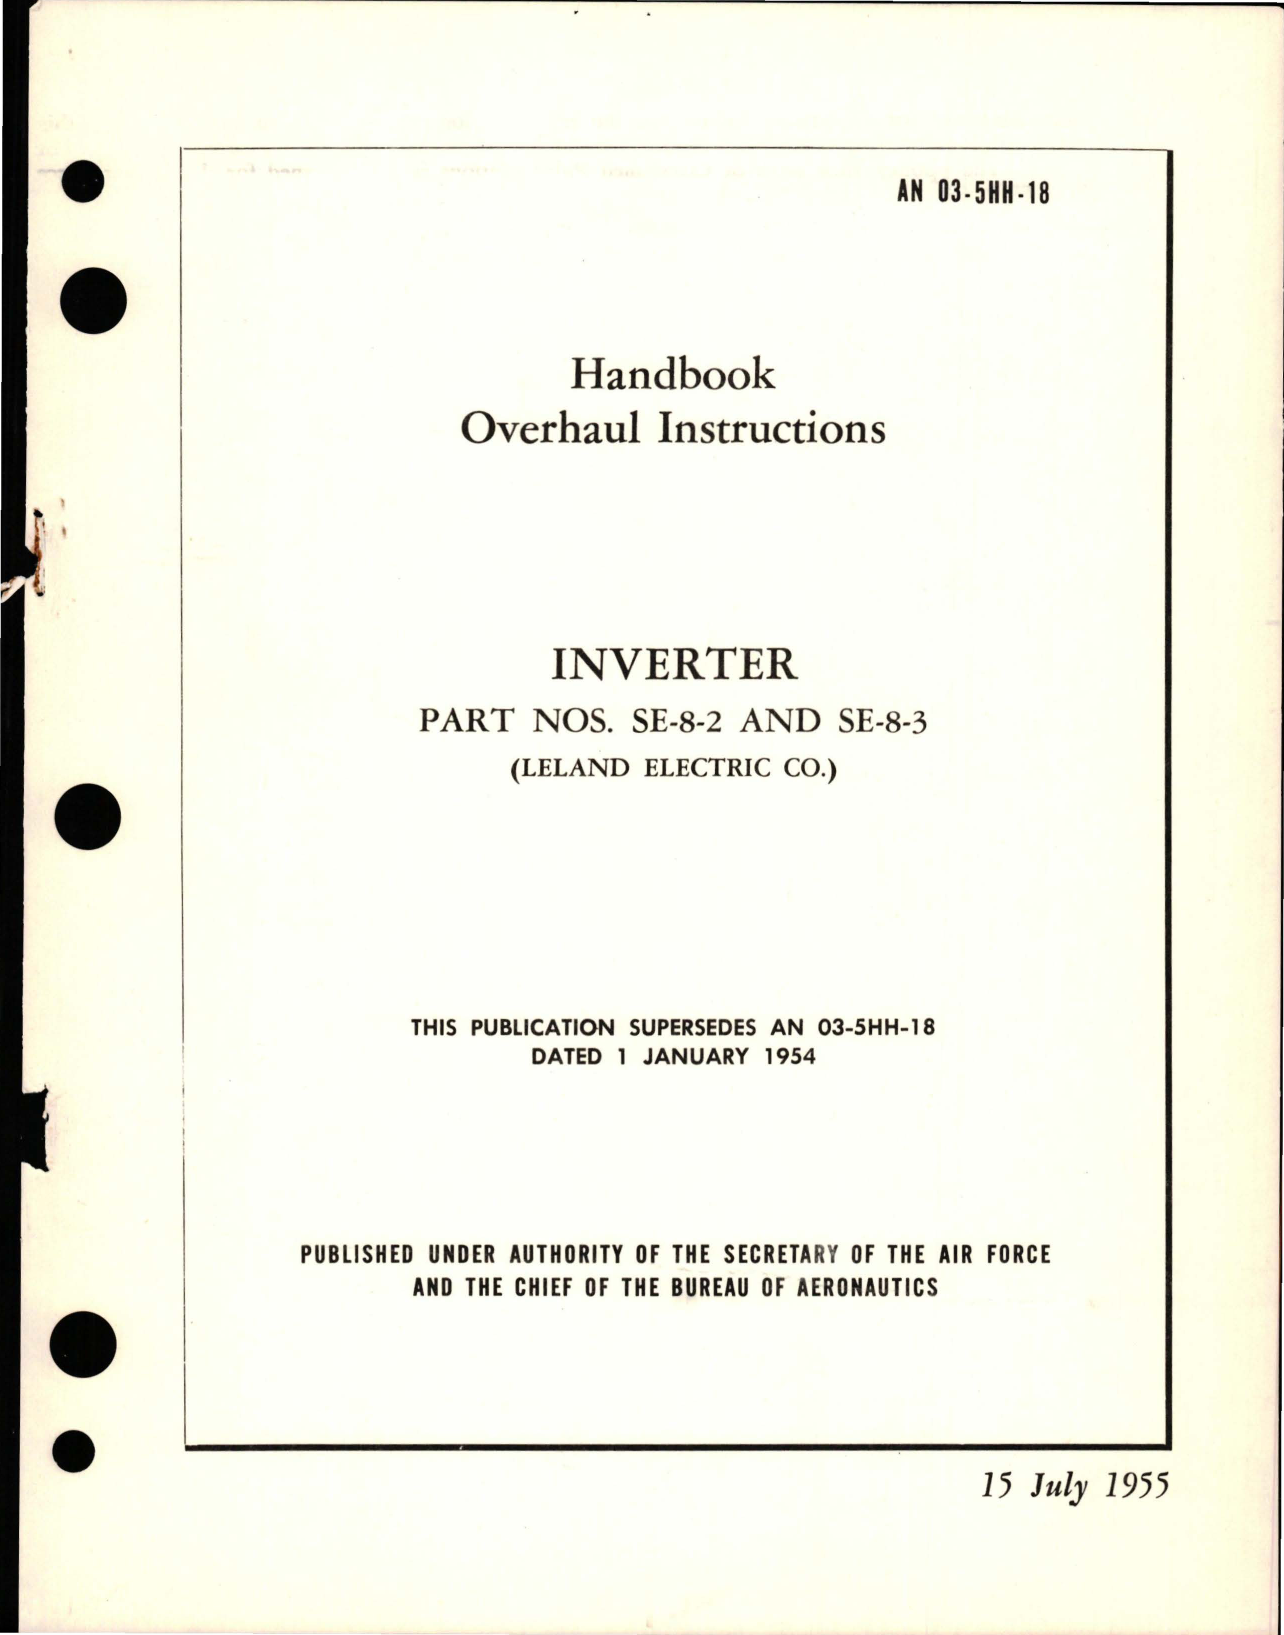 Sample page 1 from AirCorps Library document: Overhaul Instructions for Inverter - Parts SE-8-2 and SE-8-3